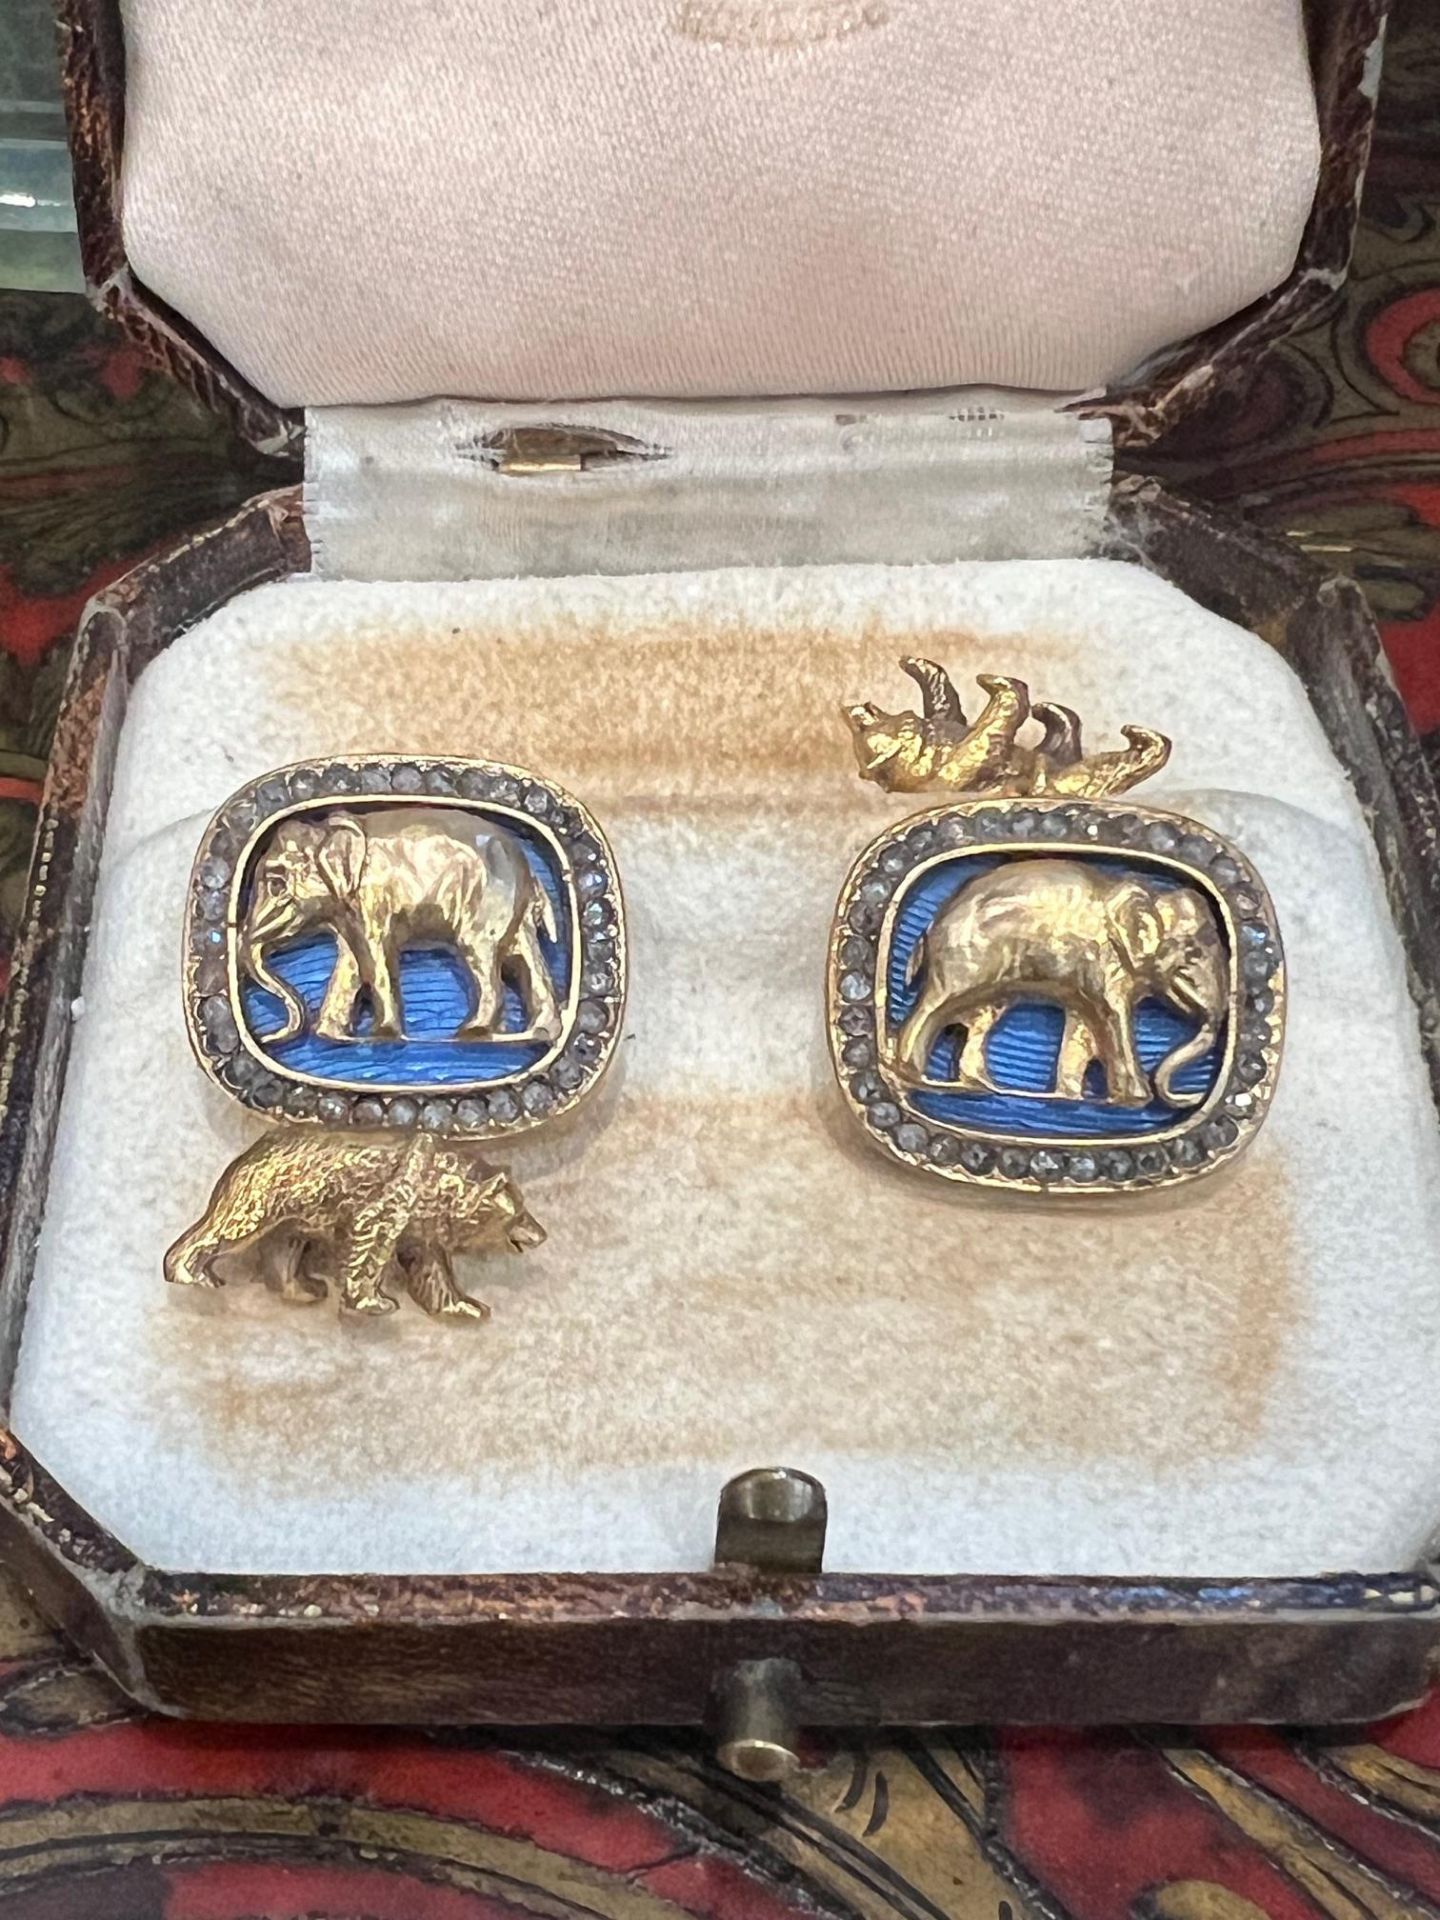 A PAIR OF FABERGE STYLE DIAMOND ENCRUSTED, SILVER GILT AND ENAMELLED CUFFLINKS - Image 11 of 13